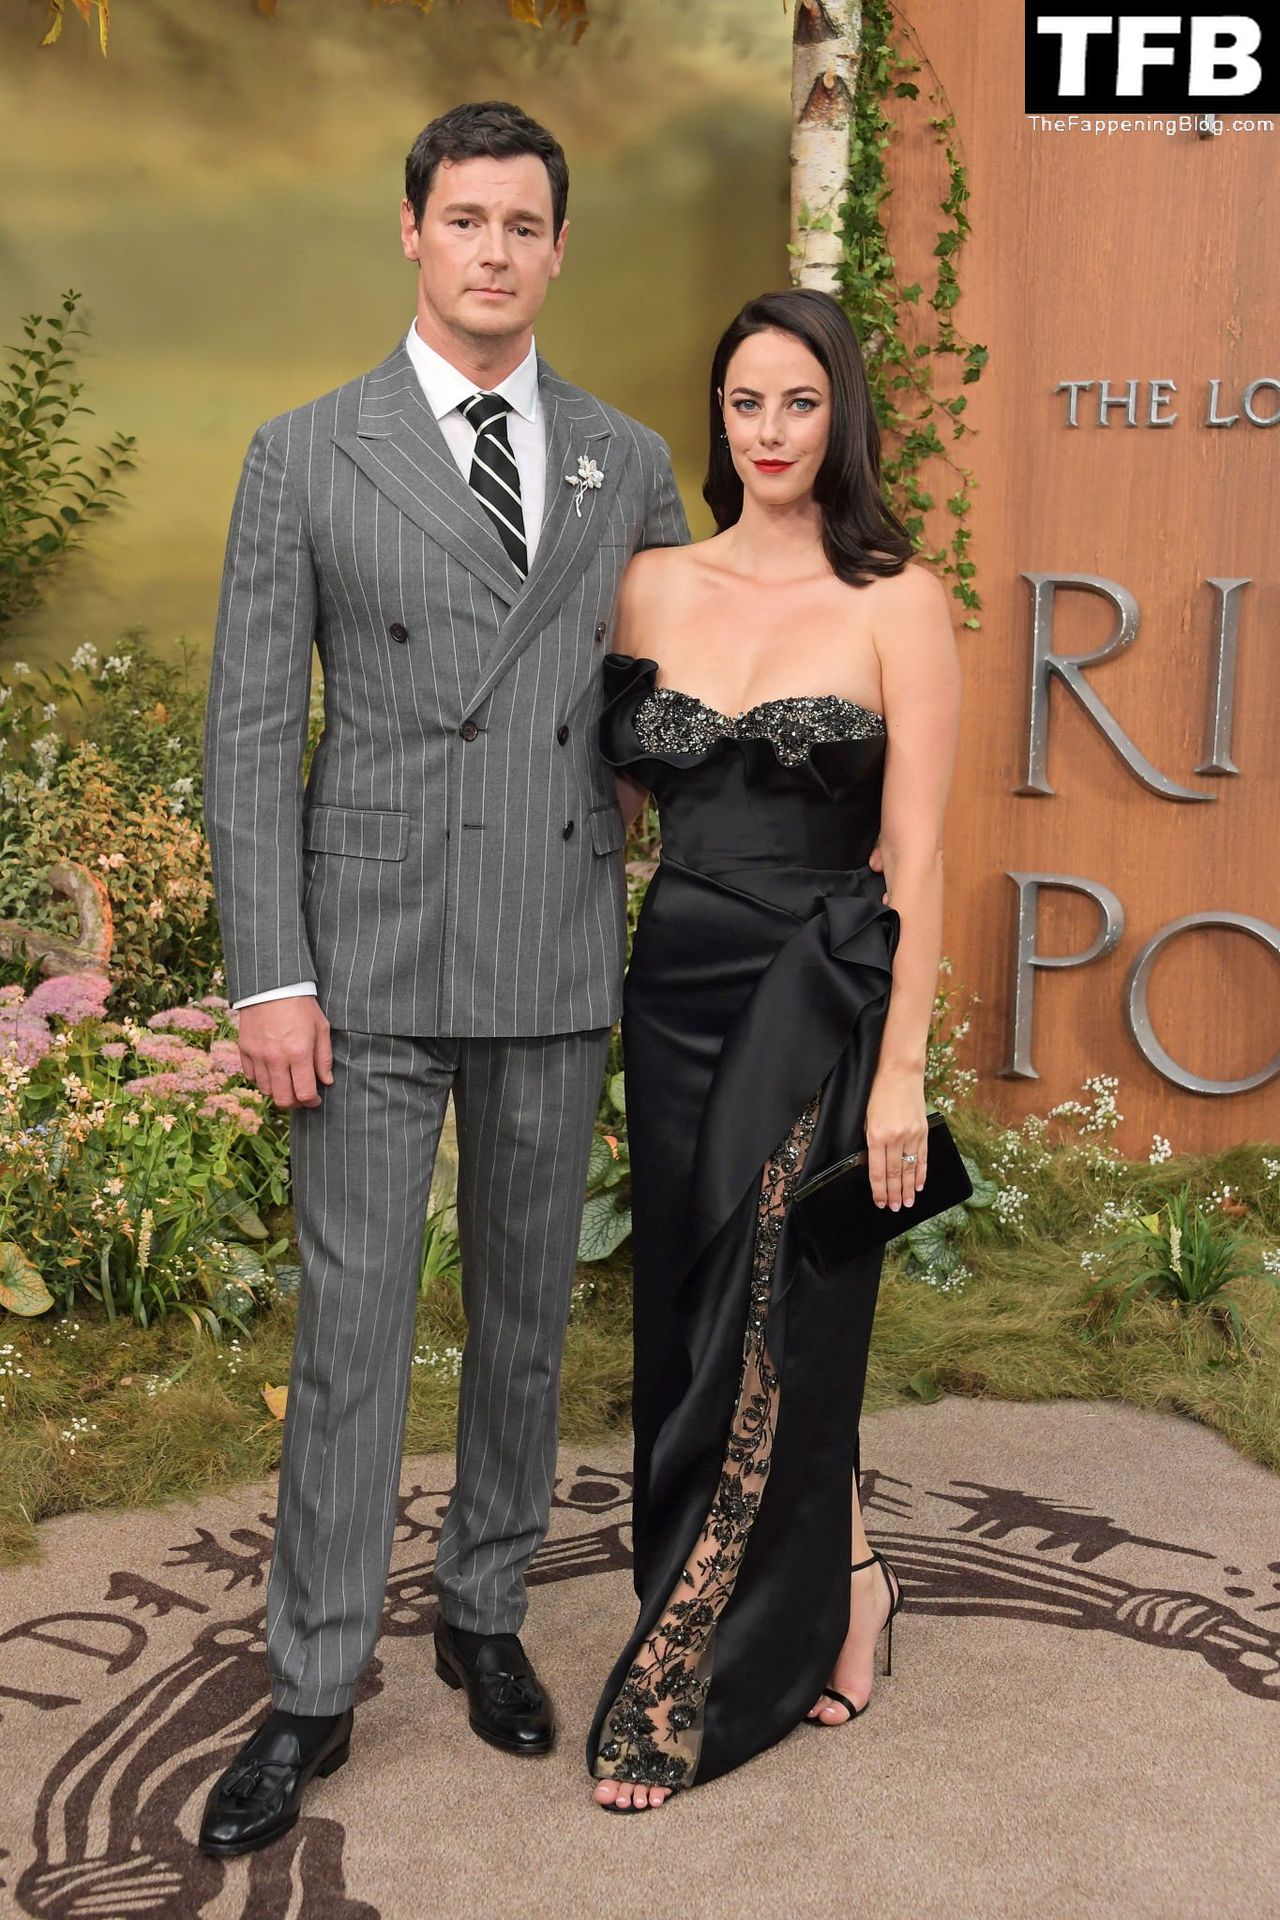 Kaya Scodelario Displays Her Beautiful Figure at the Premiere of “The Lord Of The Rings: The Rings Of Power” (69 Photos)